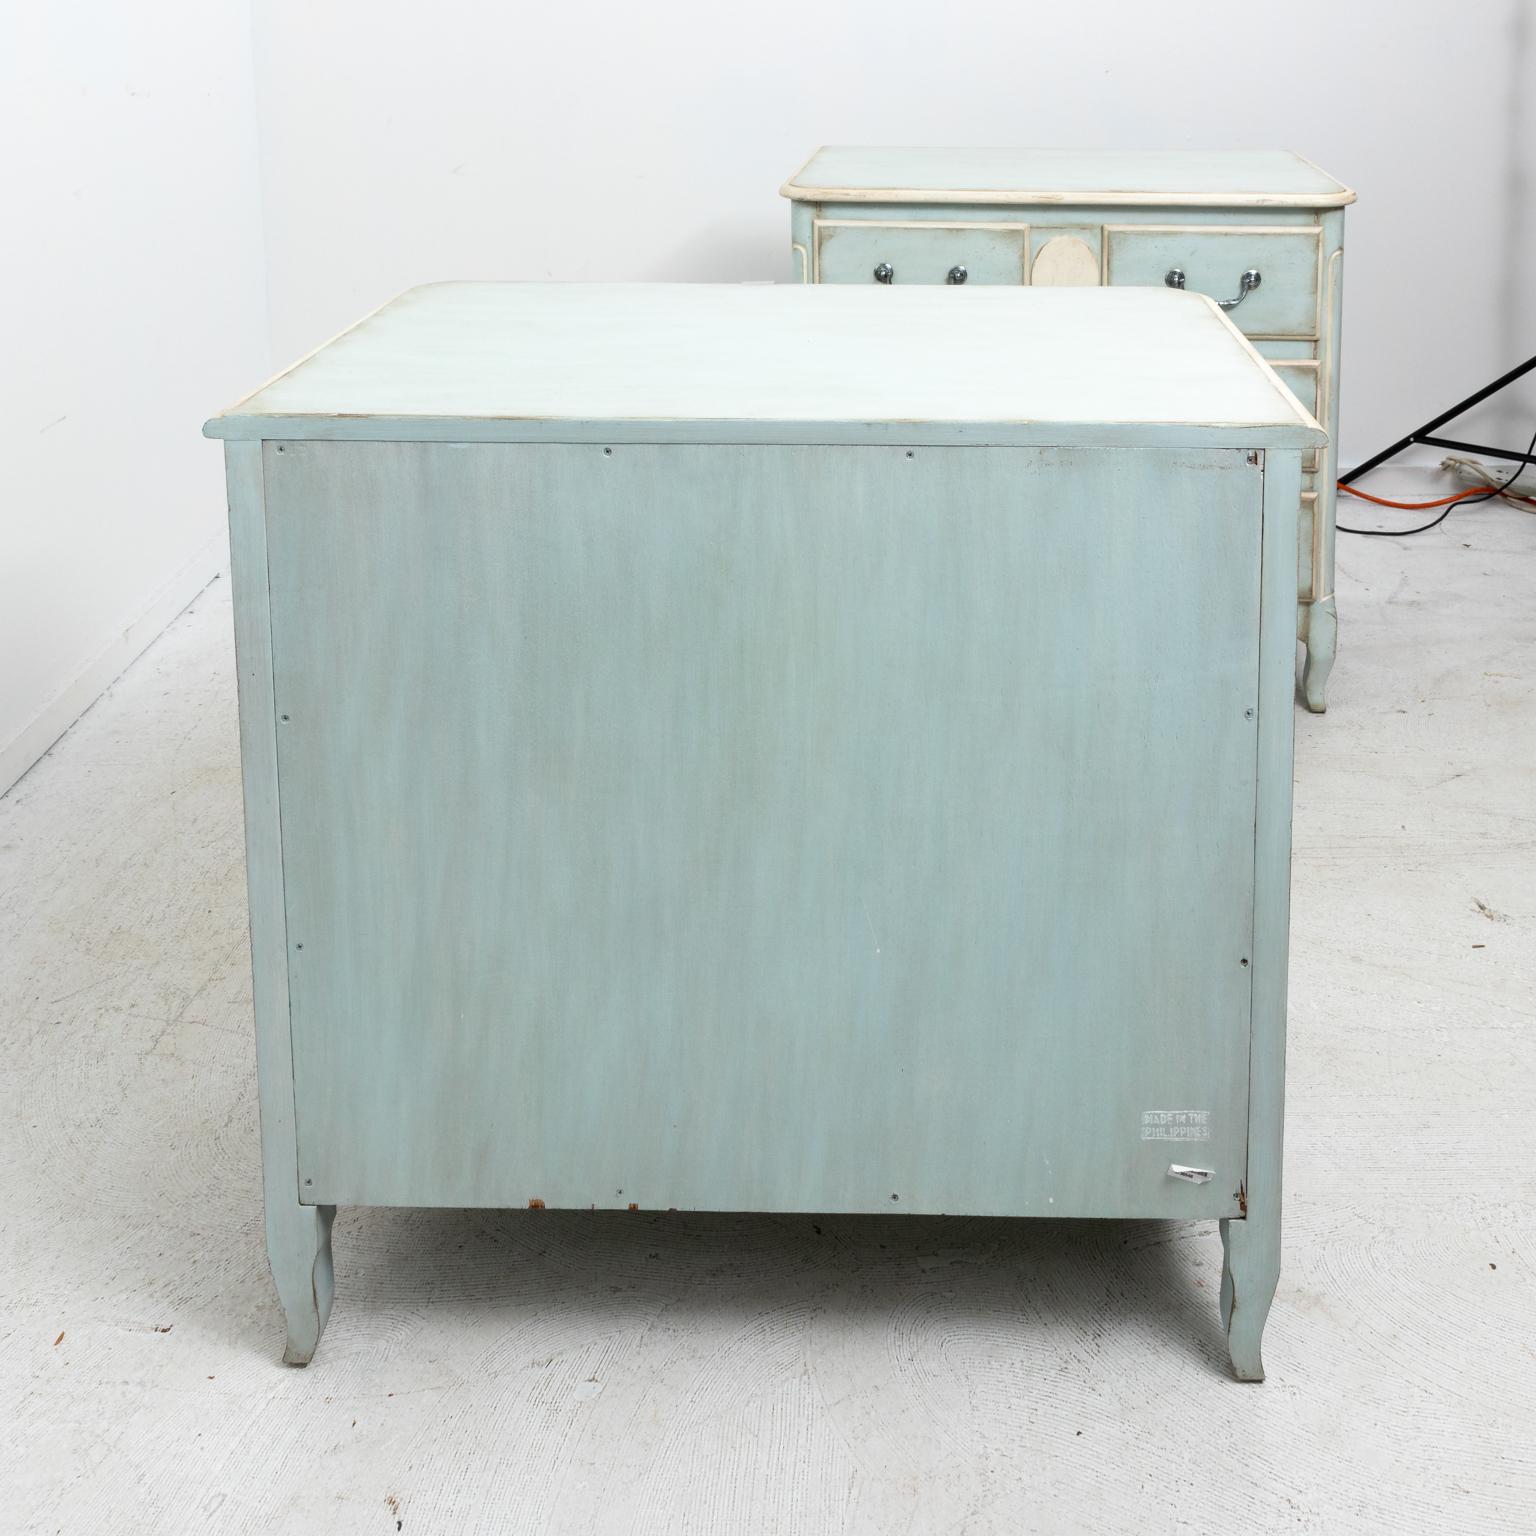 Pair of vintage Swedish style soft blue painted commodes or dressers, circa 20th century. The pieces also feature cream painted accents adorned with decorative silver pulls. Please note of wear consistent with age including minor paint loss and